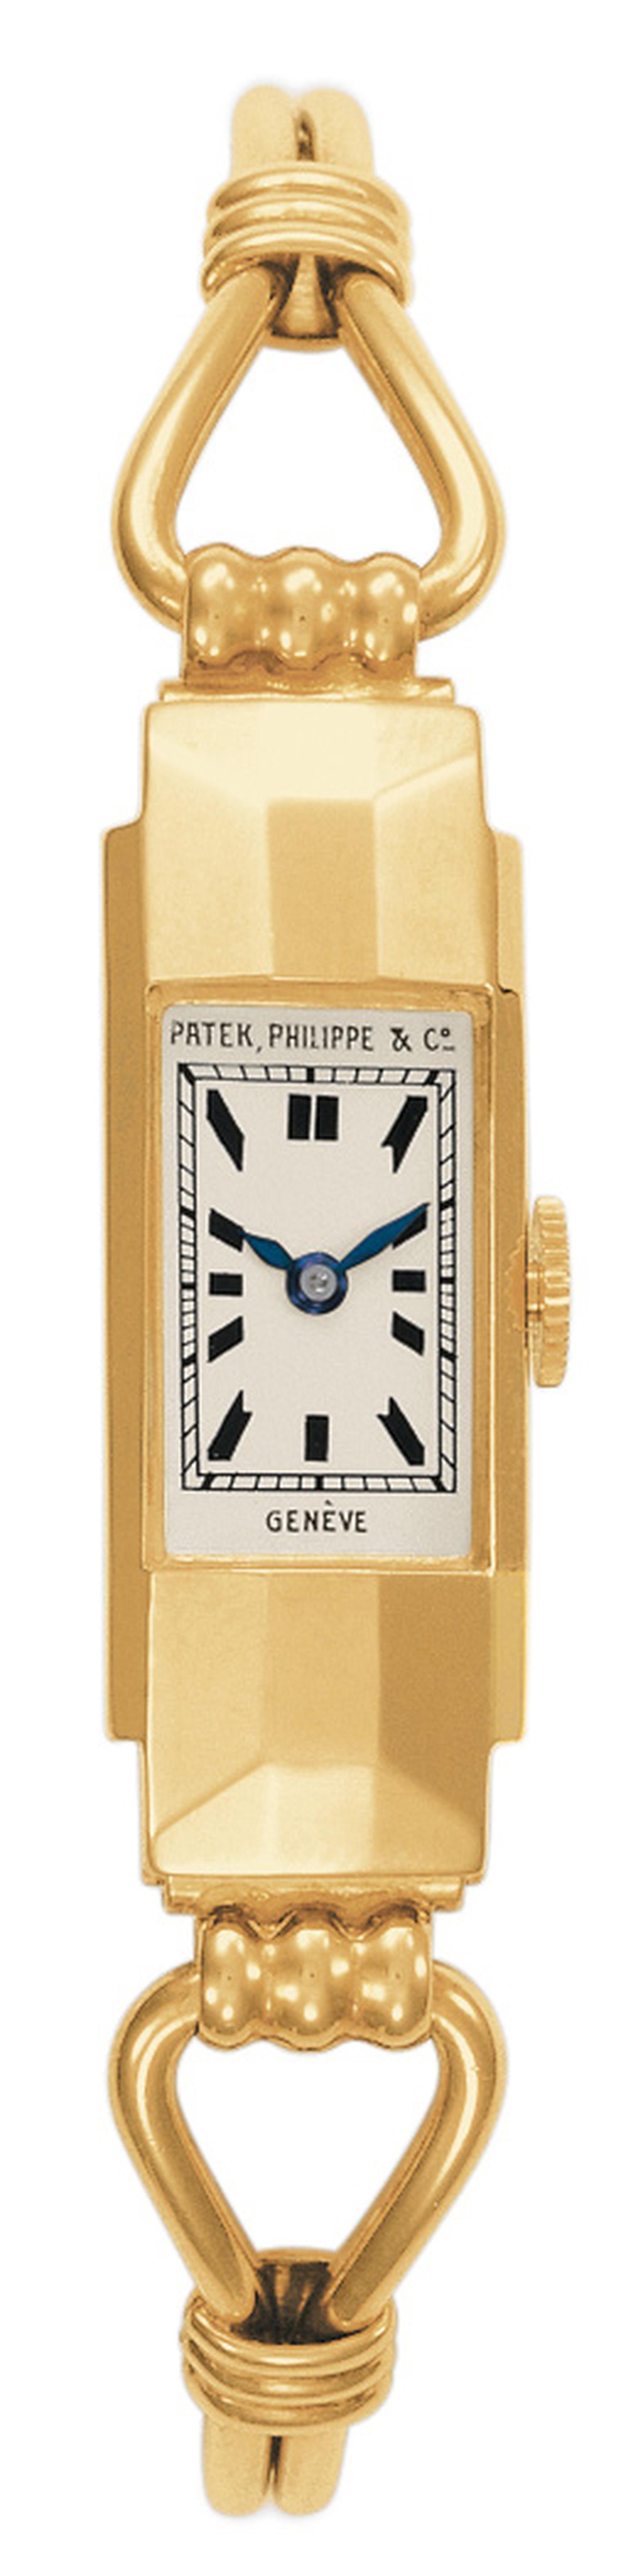 Patek-Philippe-P0707_a_100_collection-1925-40